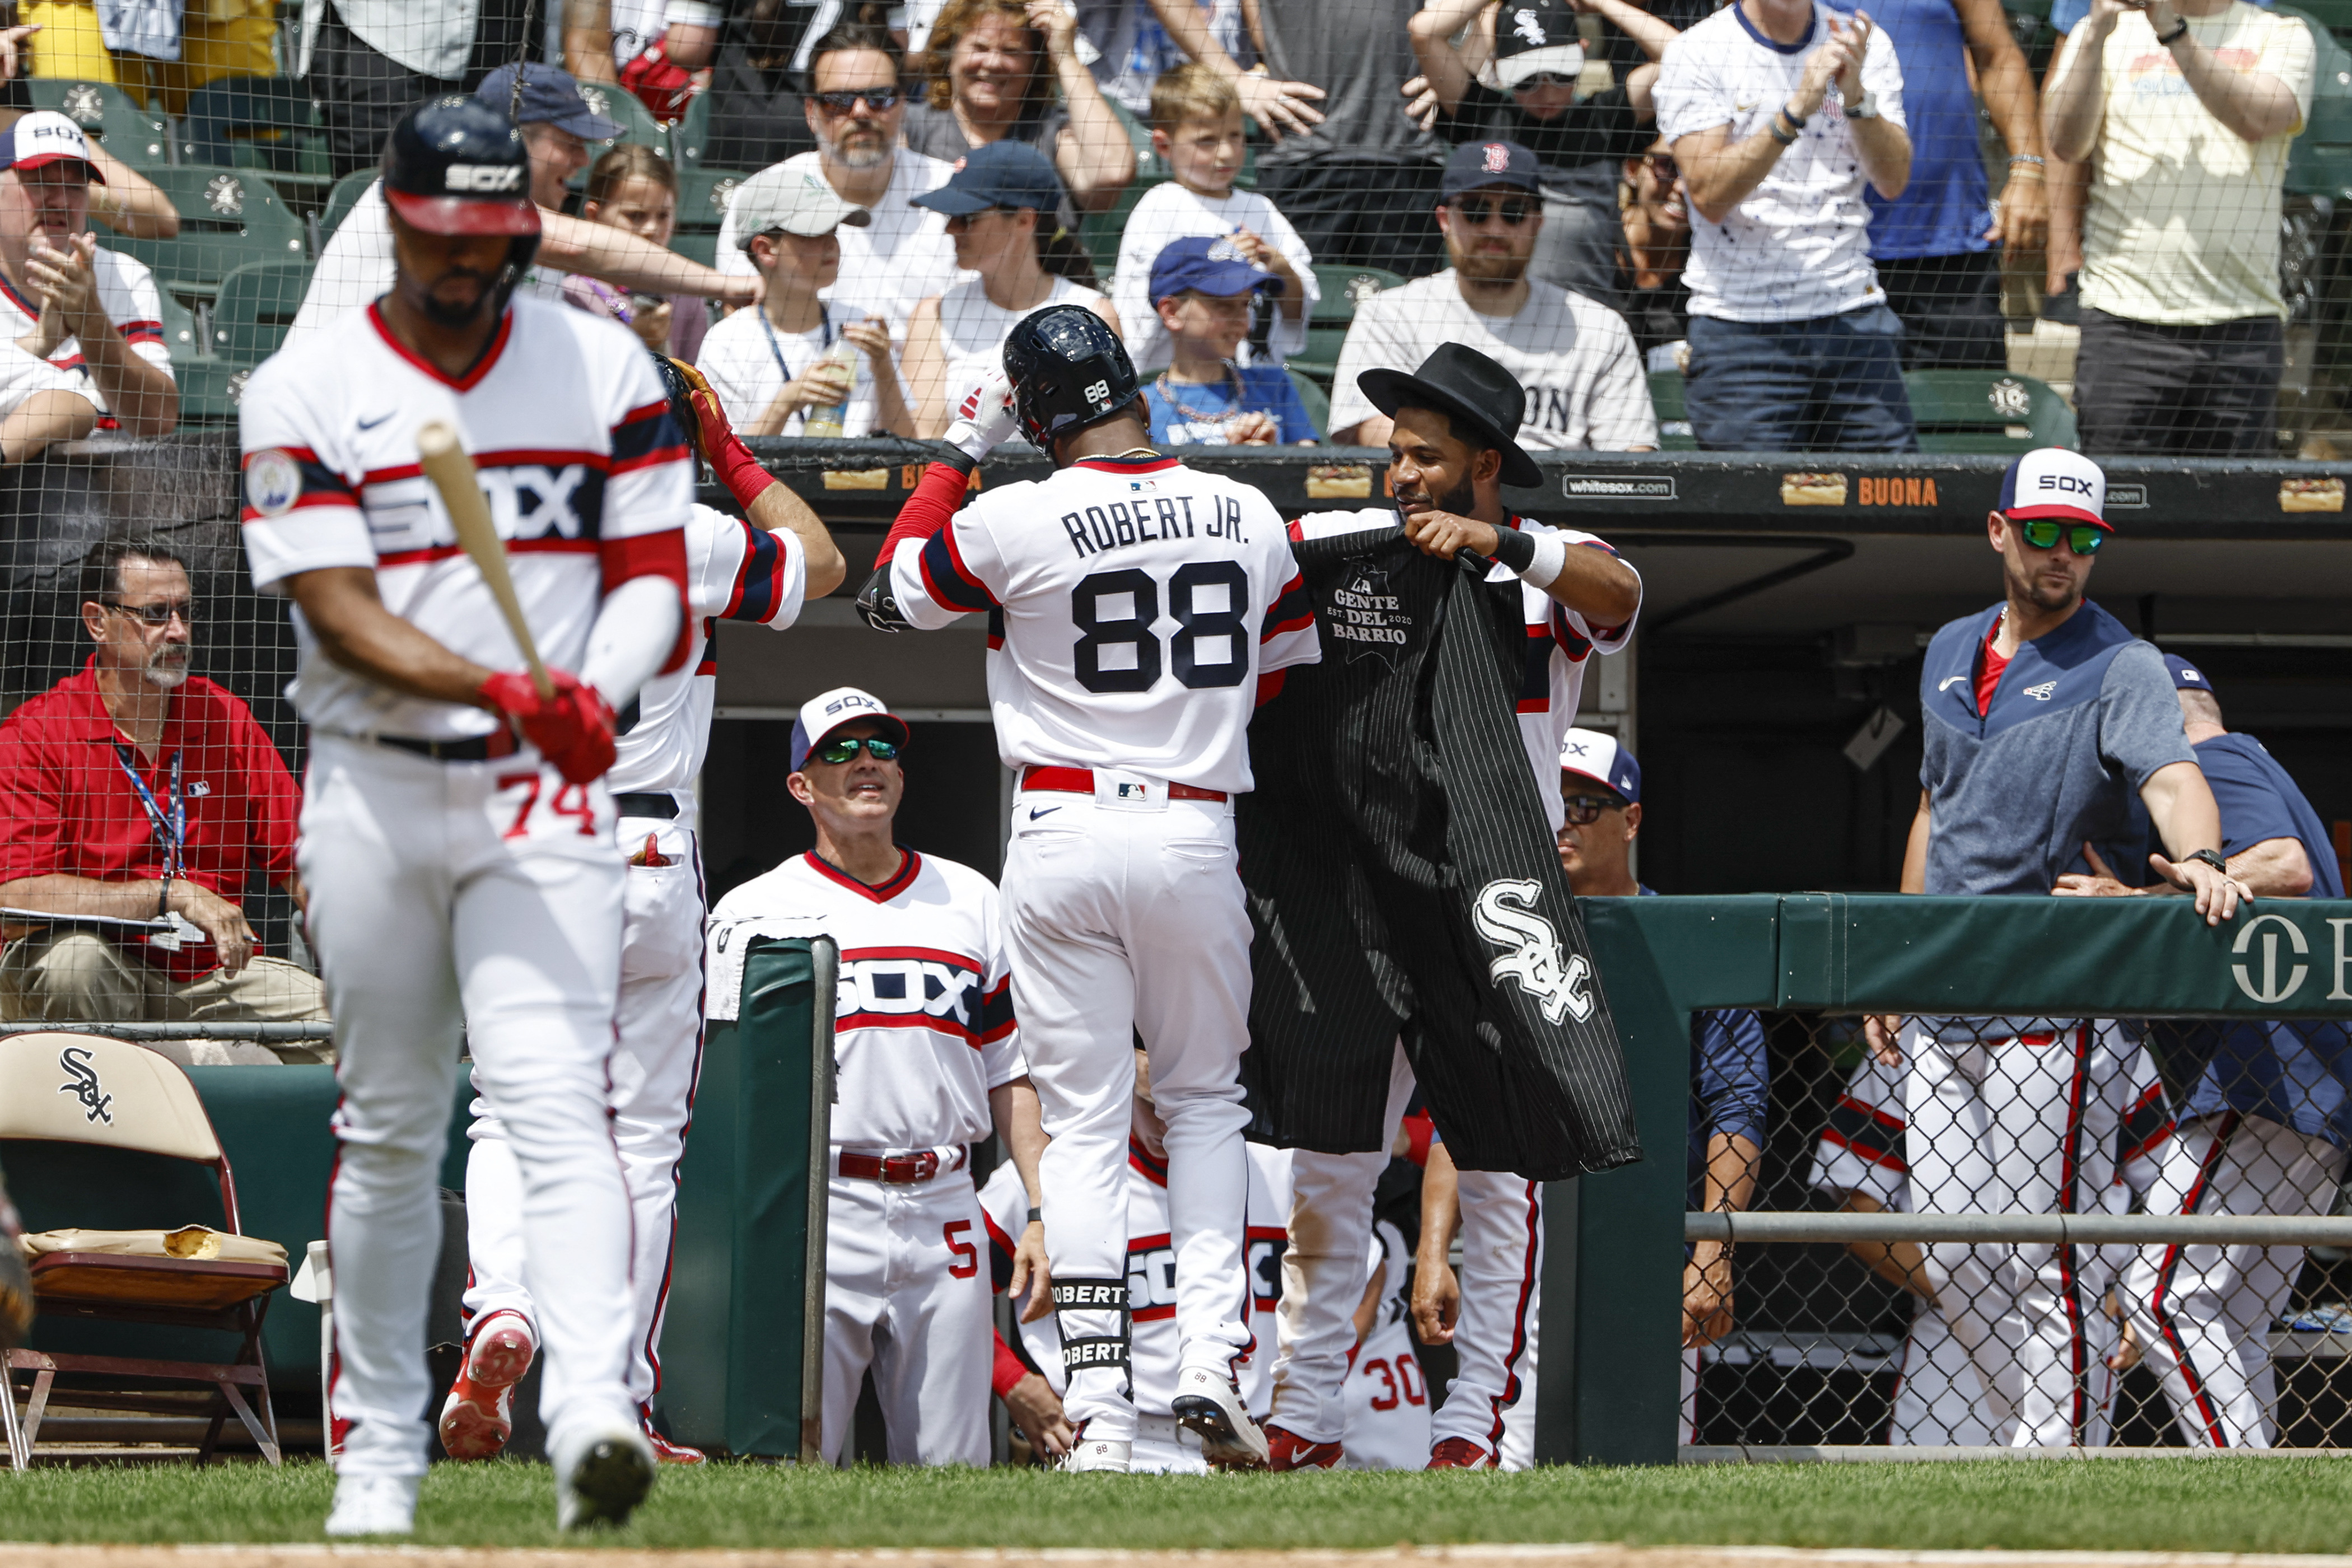 Luis Robert Jr. hits two HRs as White Sox beat Red Sox